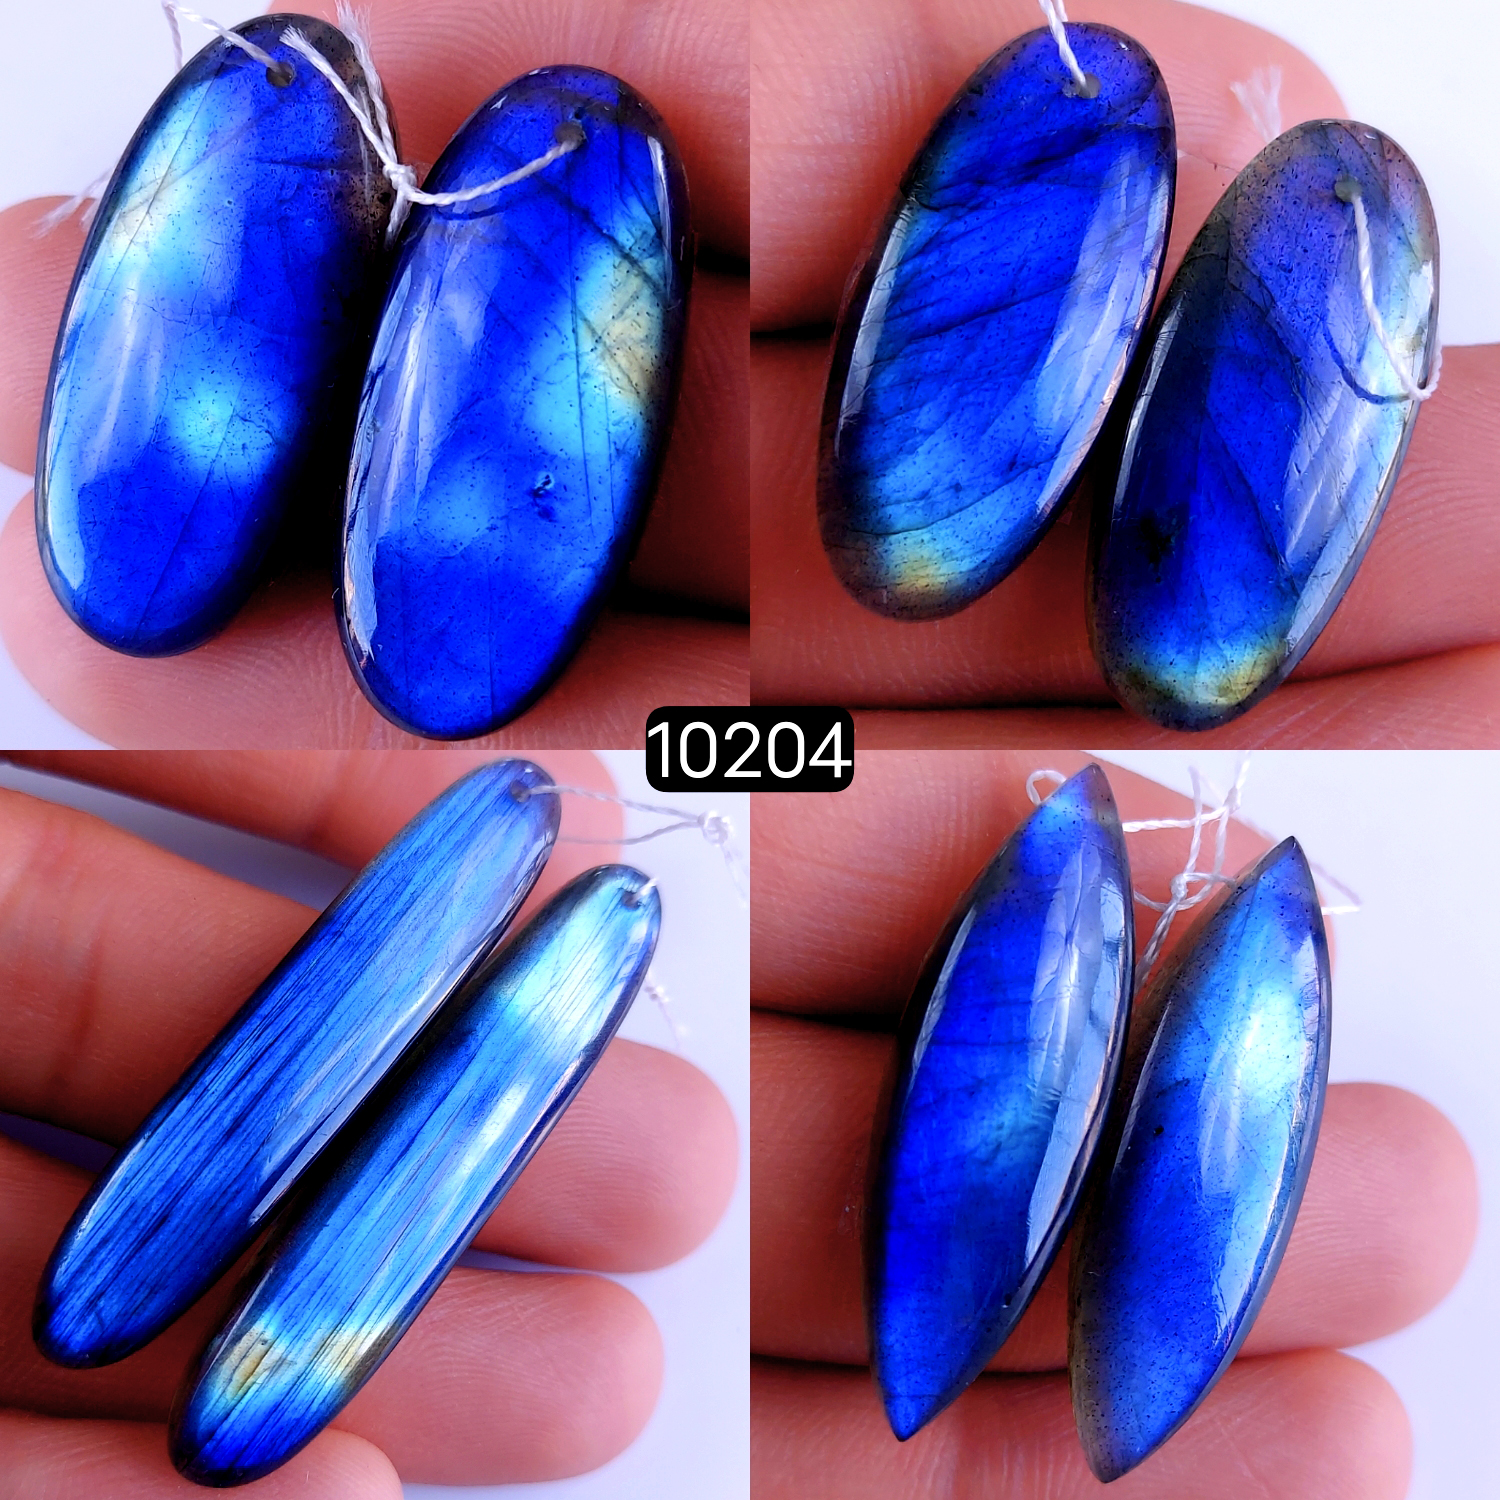 4Pair 173Cts Natural Labradorite Crystal Drill Dangle Drop Earring Pairs Silver Earrings Blue Labradorite Hoop Jewelry  45x8 28x12mm #10204